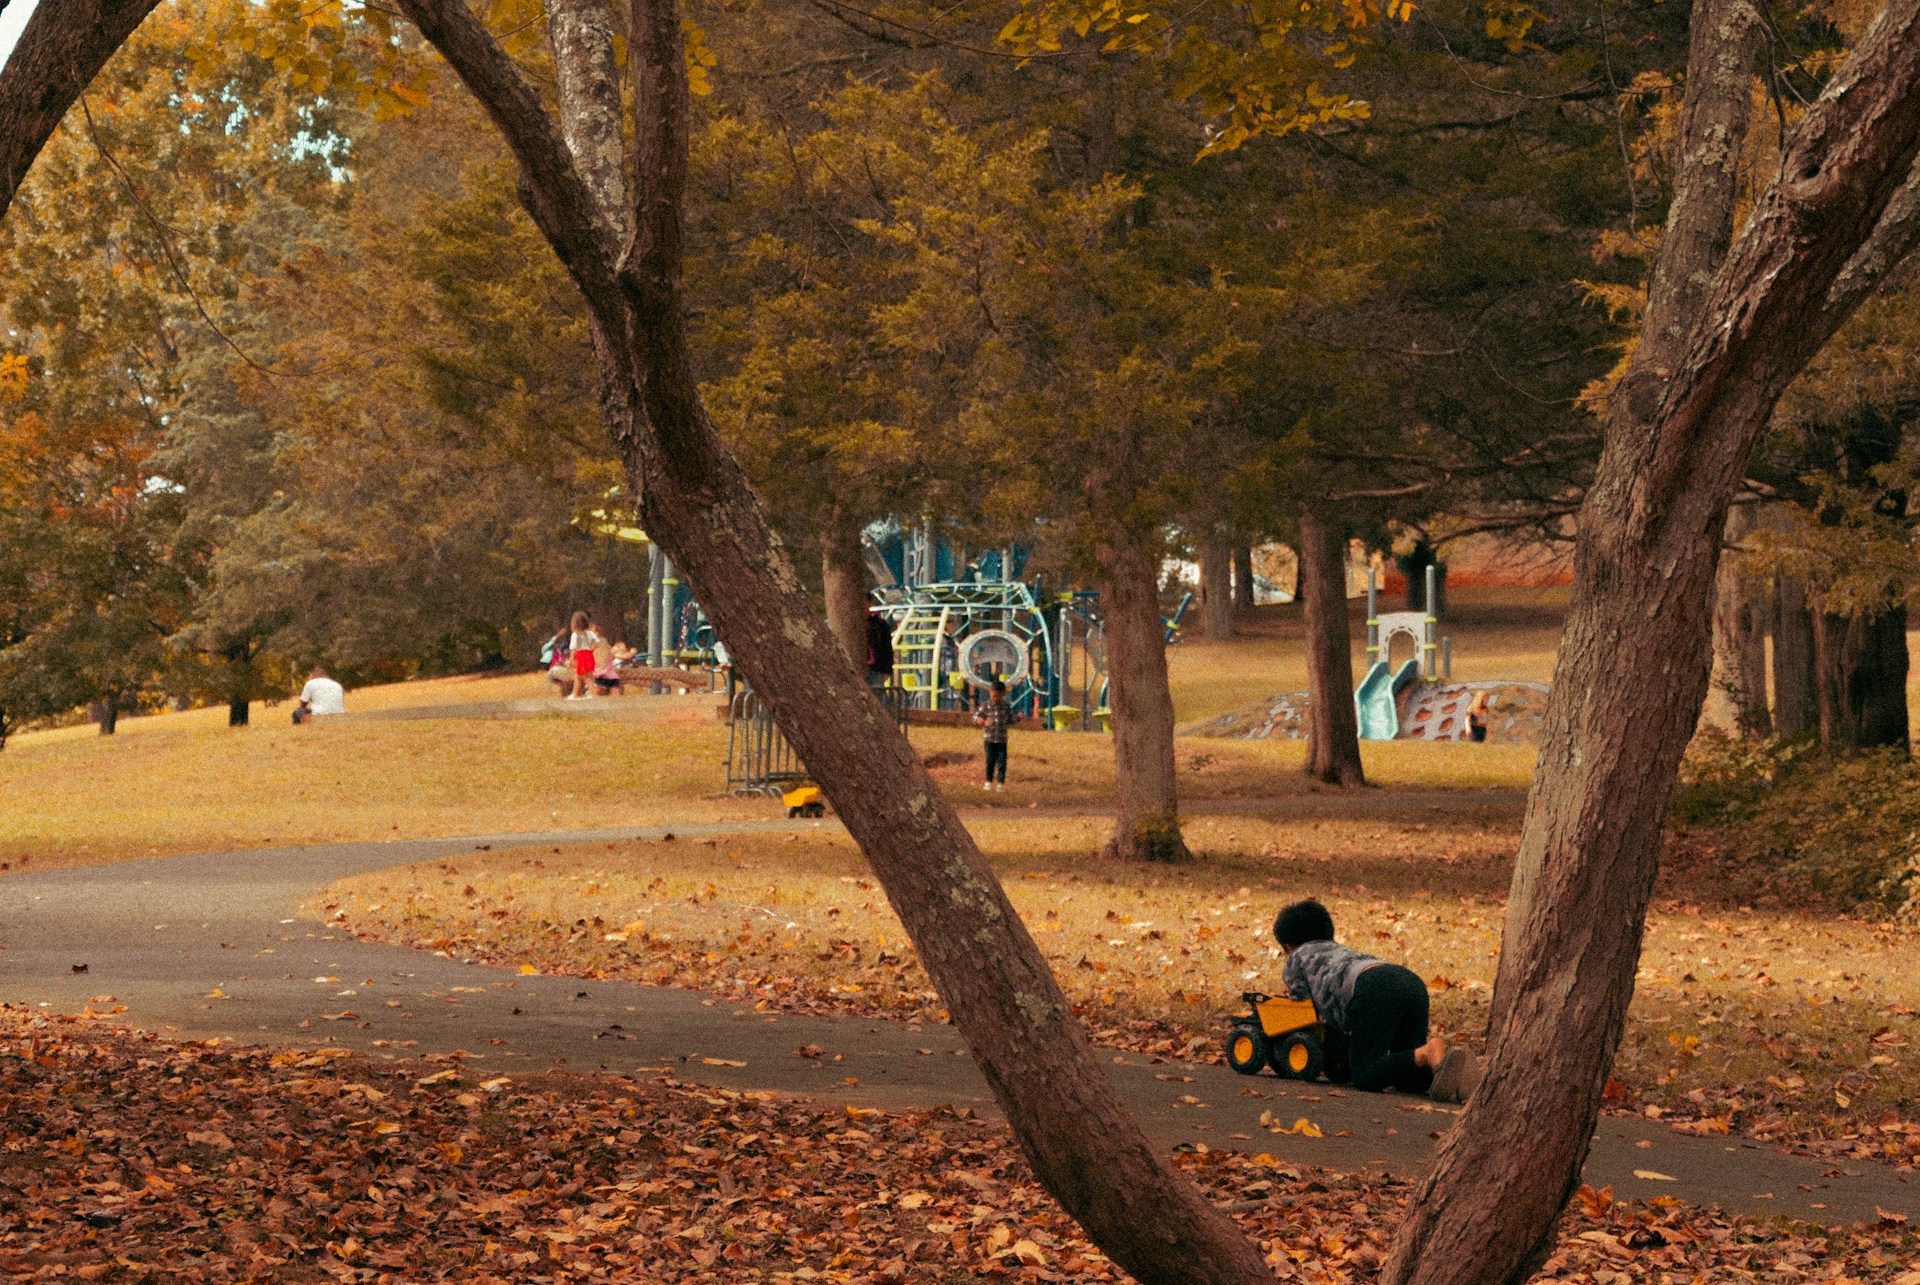 Park in the fall with walking path and playground